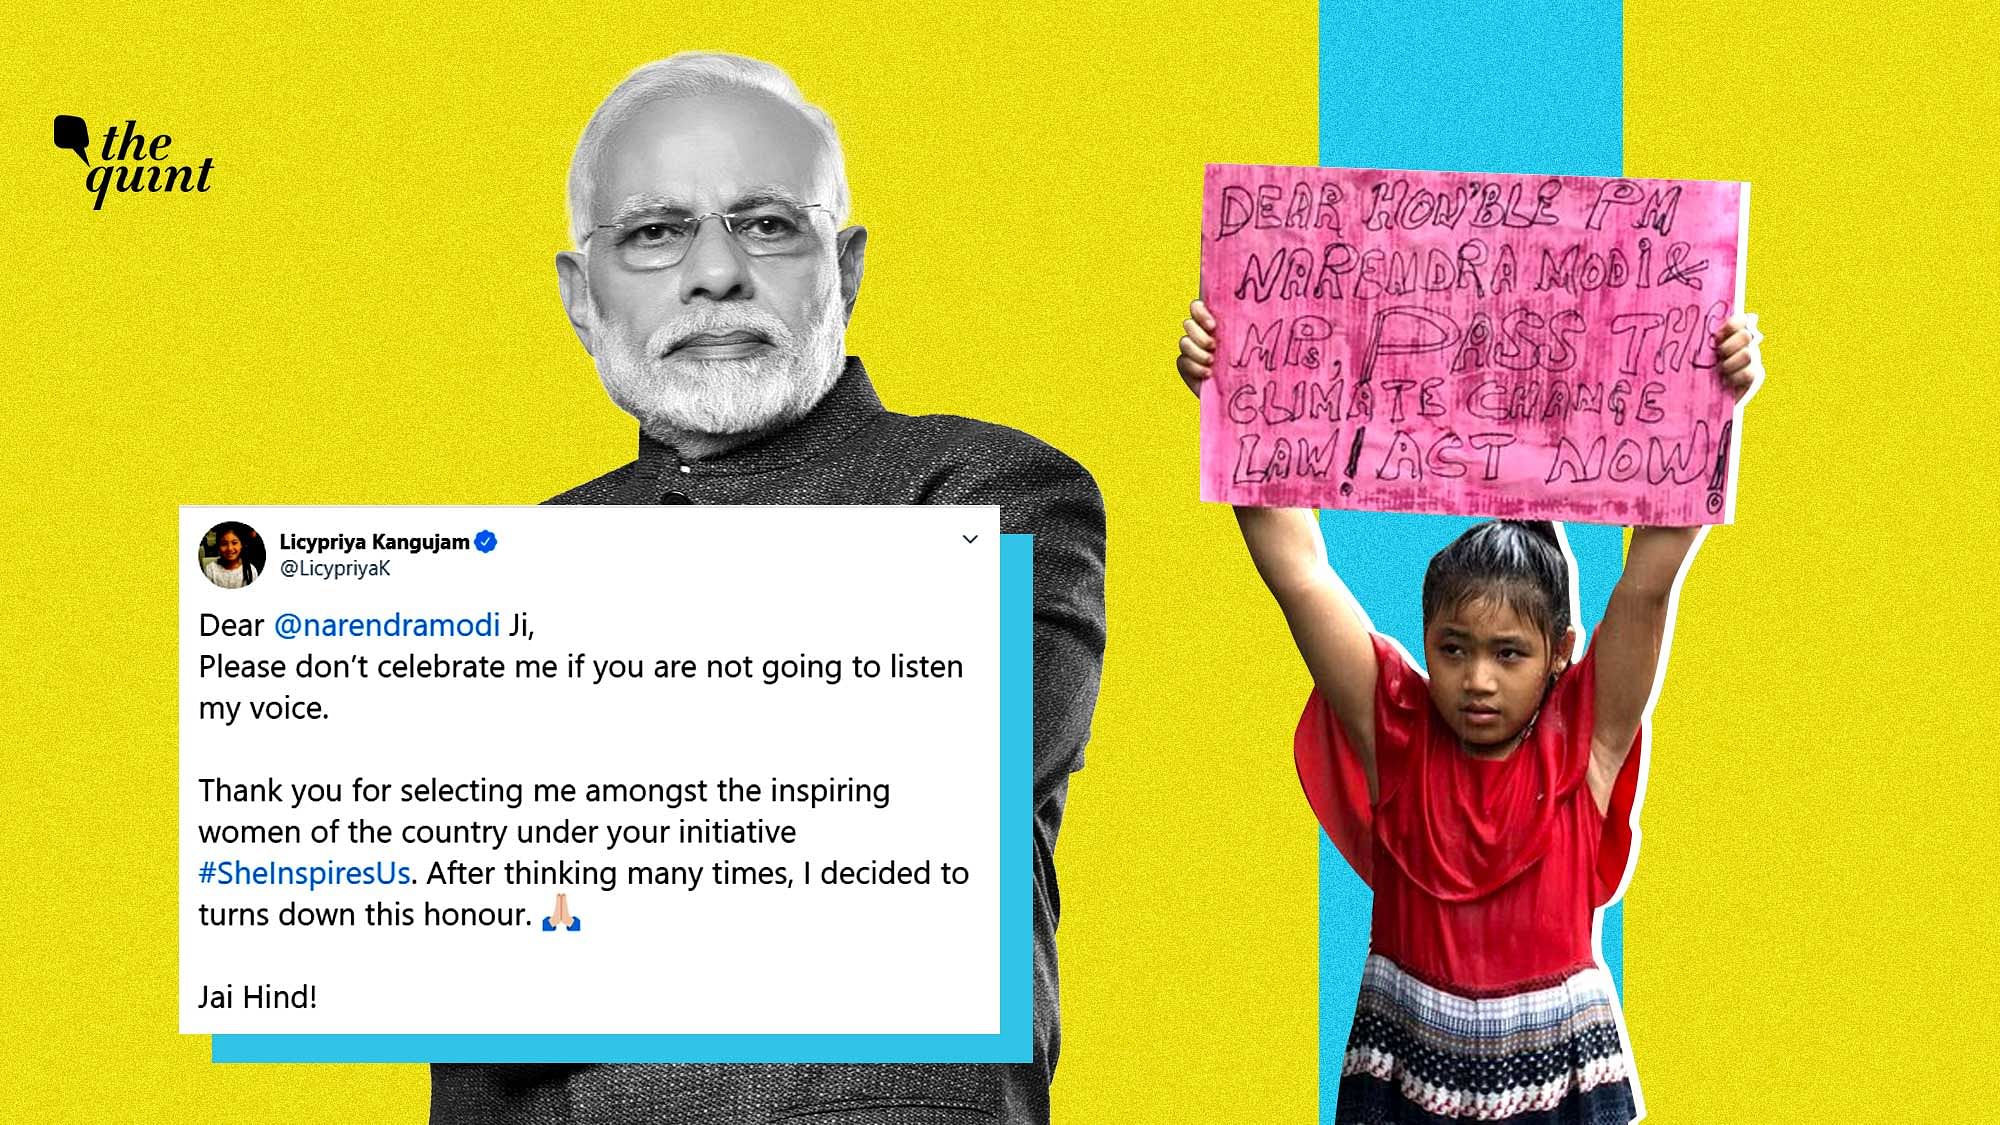 “Please don’t celebrate me if you are not going to listen my voice,” Licypriya Kangujam tweeted in response to a tweet by MyGovIndia and PM Modi’s women’s day campaign.&nbsp;